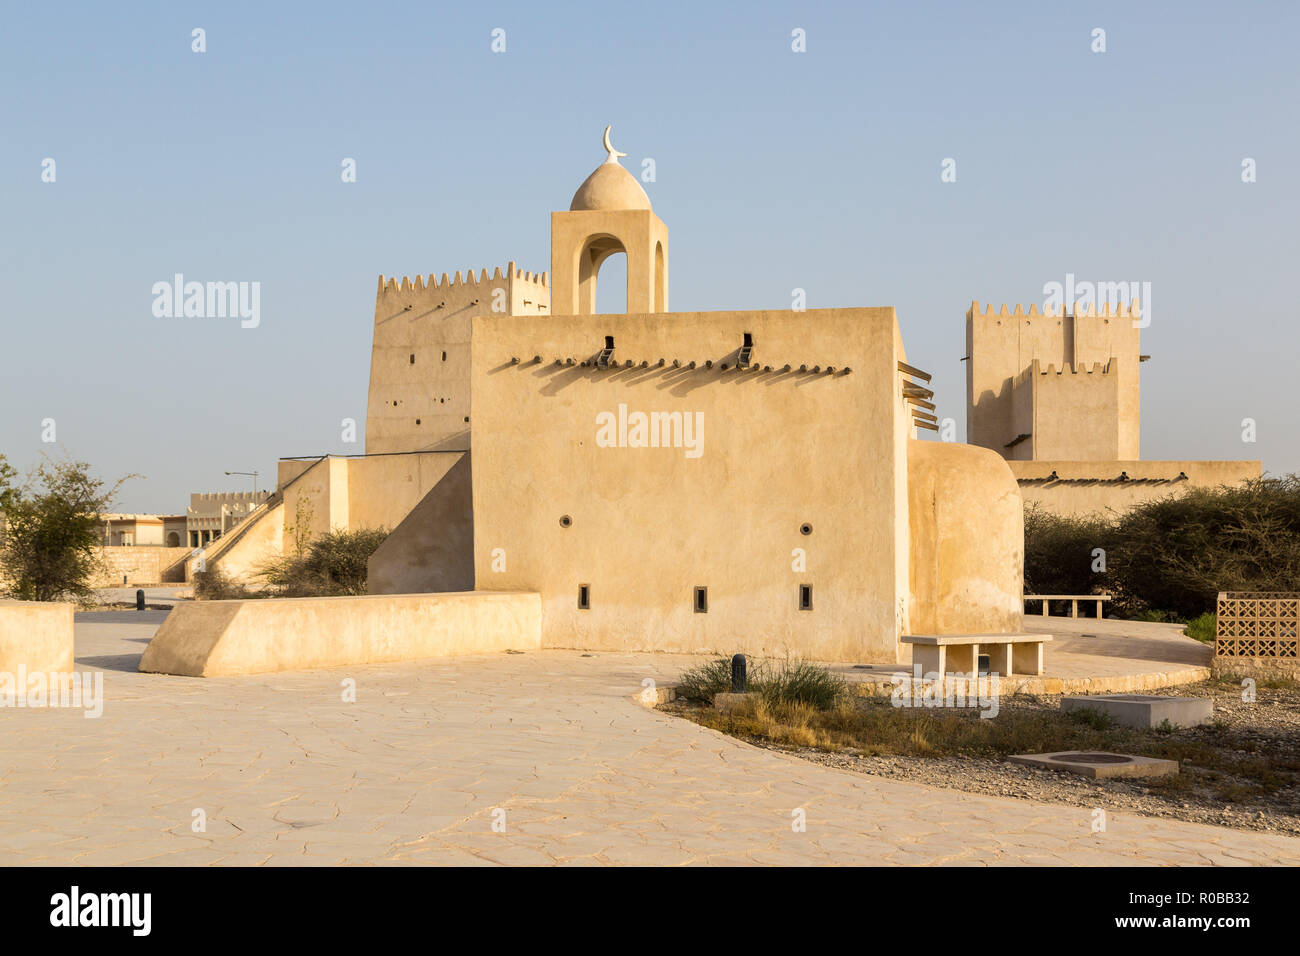 Barzan watchtowers and an Old mosque built with coral rock and limestone, Umm Salal Mohammed Fort Towers, ancient Arabian fortification near Umm Salal Stock Photo